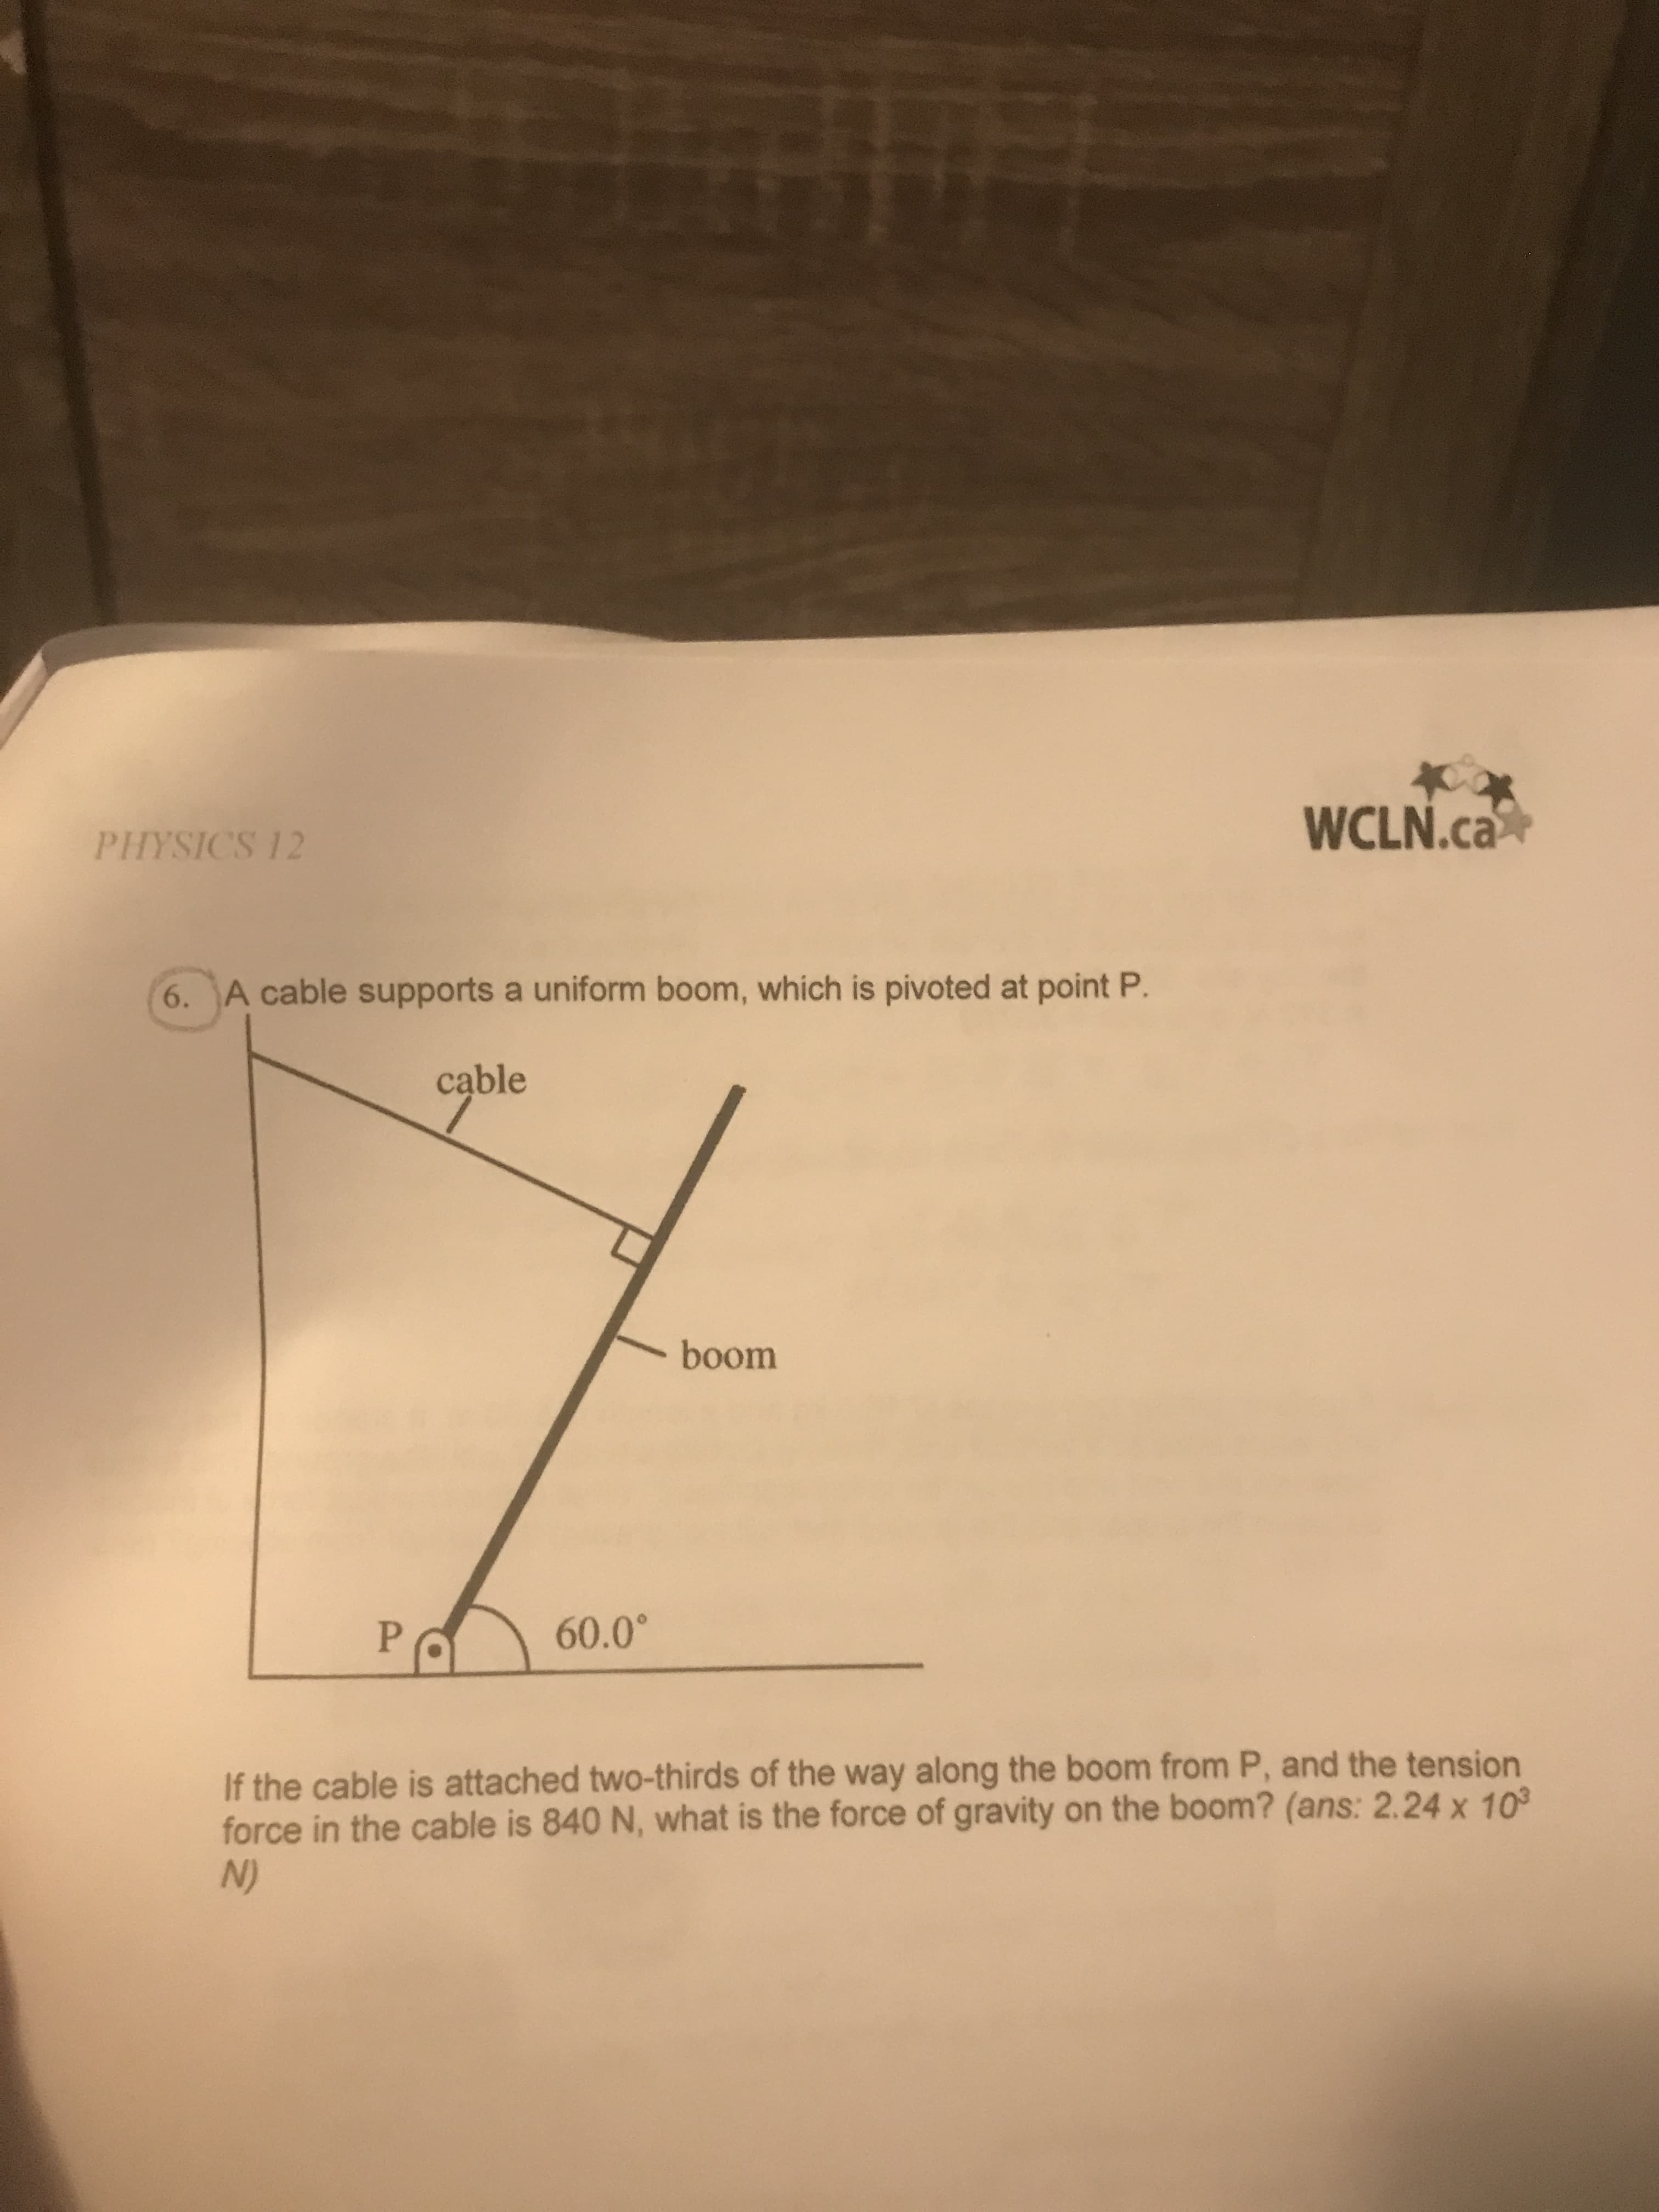 WCLN.ca
PHYSICS 12
6. A cable supports a uniform boom, which is pivoted at point P.
cąble
boom
If the cable is attached two-thirds of the way along the boom from P, and the tension
force in the cable is 840 N, what is the force of gravity on the boom? (ans: 2.24 x 10°
(N
